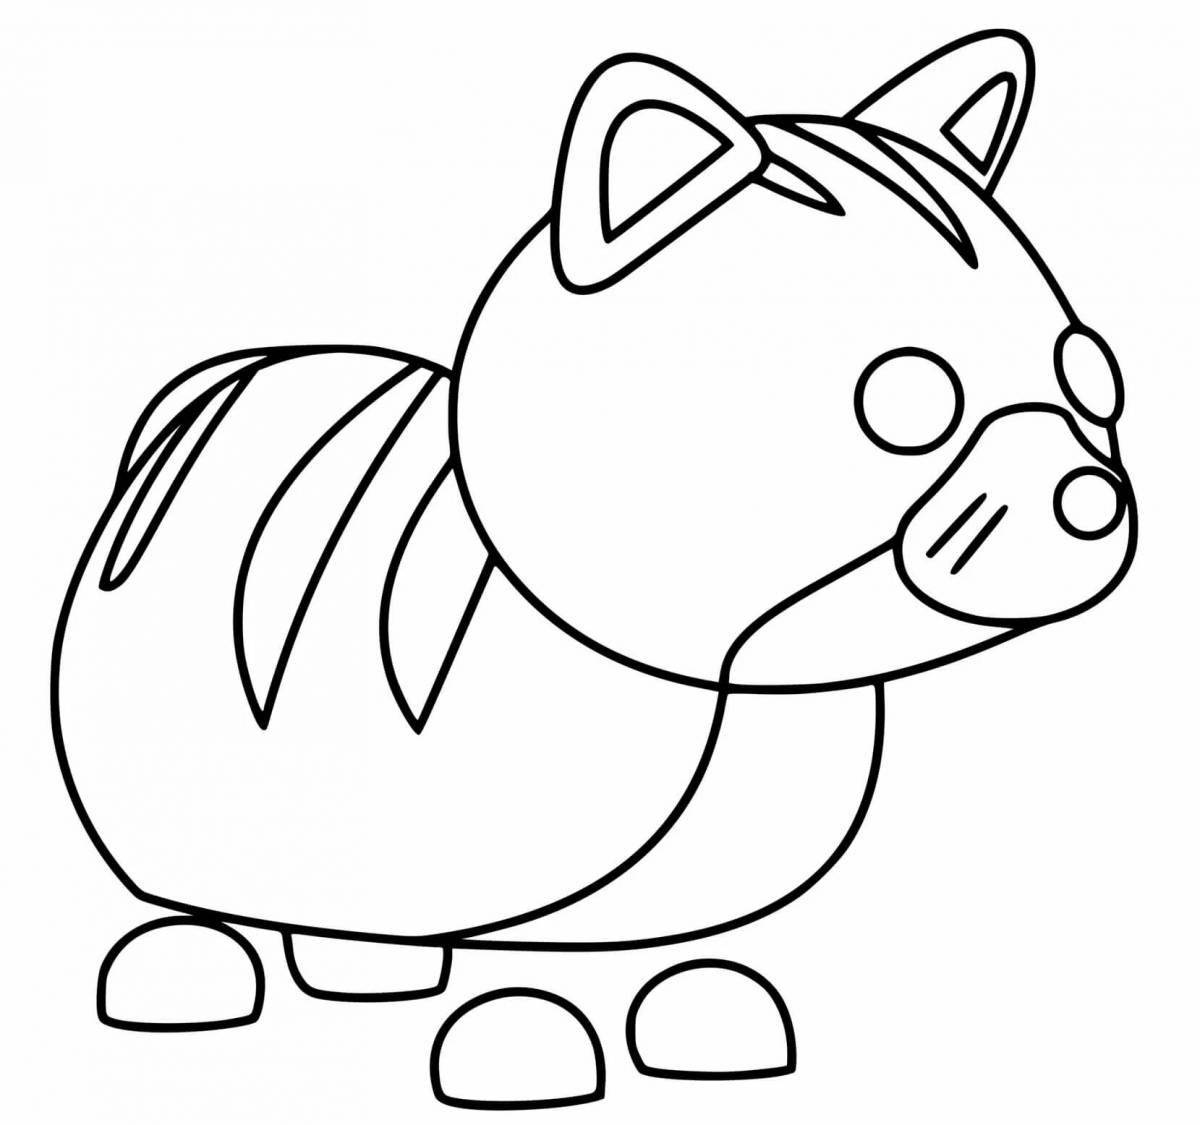 Lovely adopt me egg coloring pages